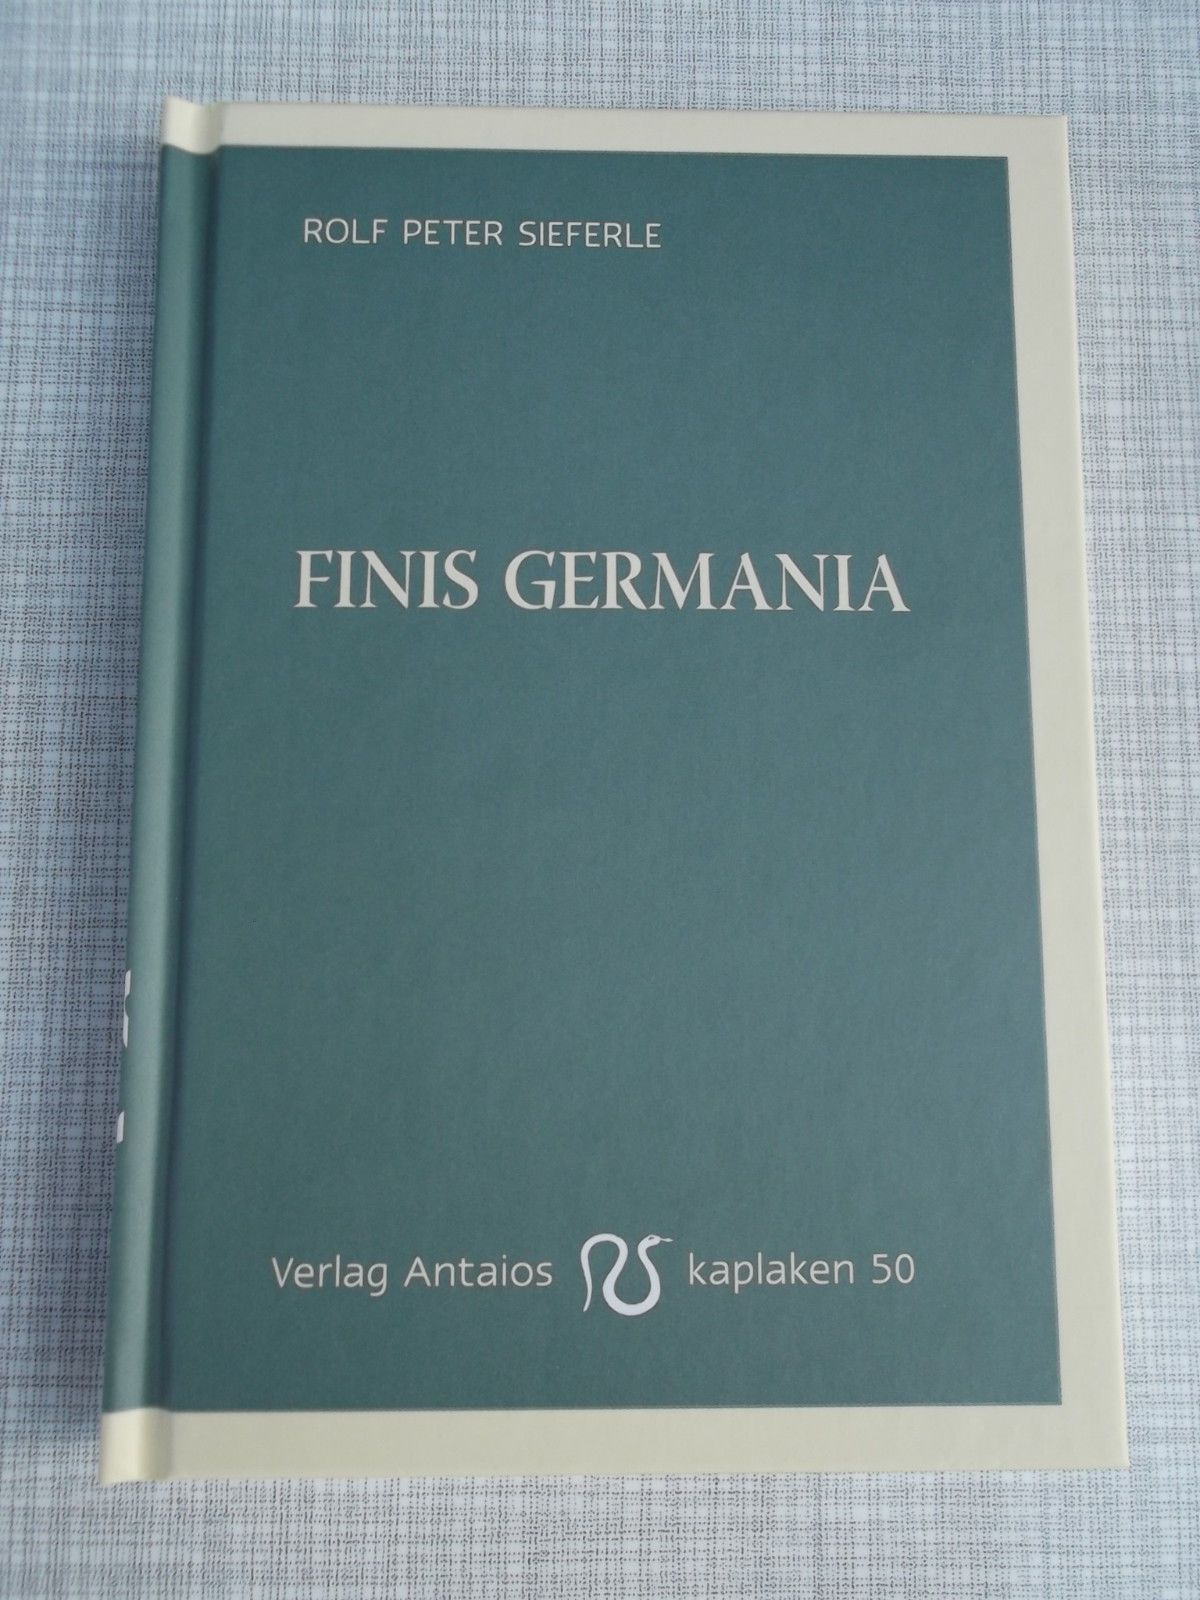 Finis Germania - Rolf Peter Sieferle - Edition Antaios TOP!